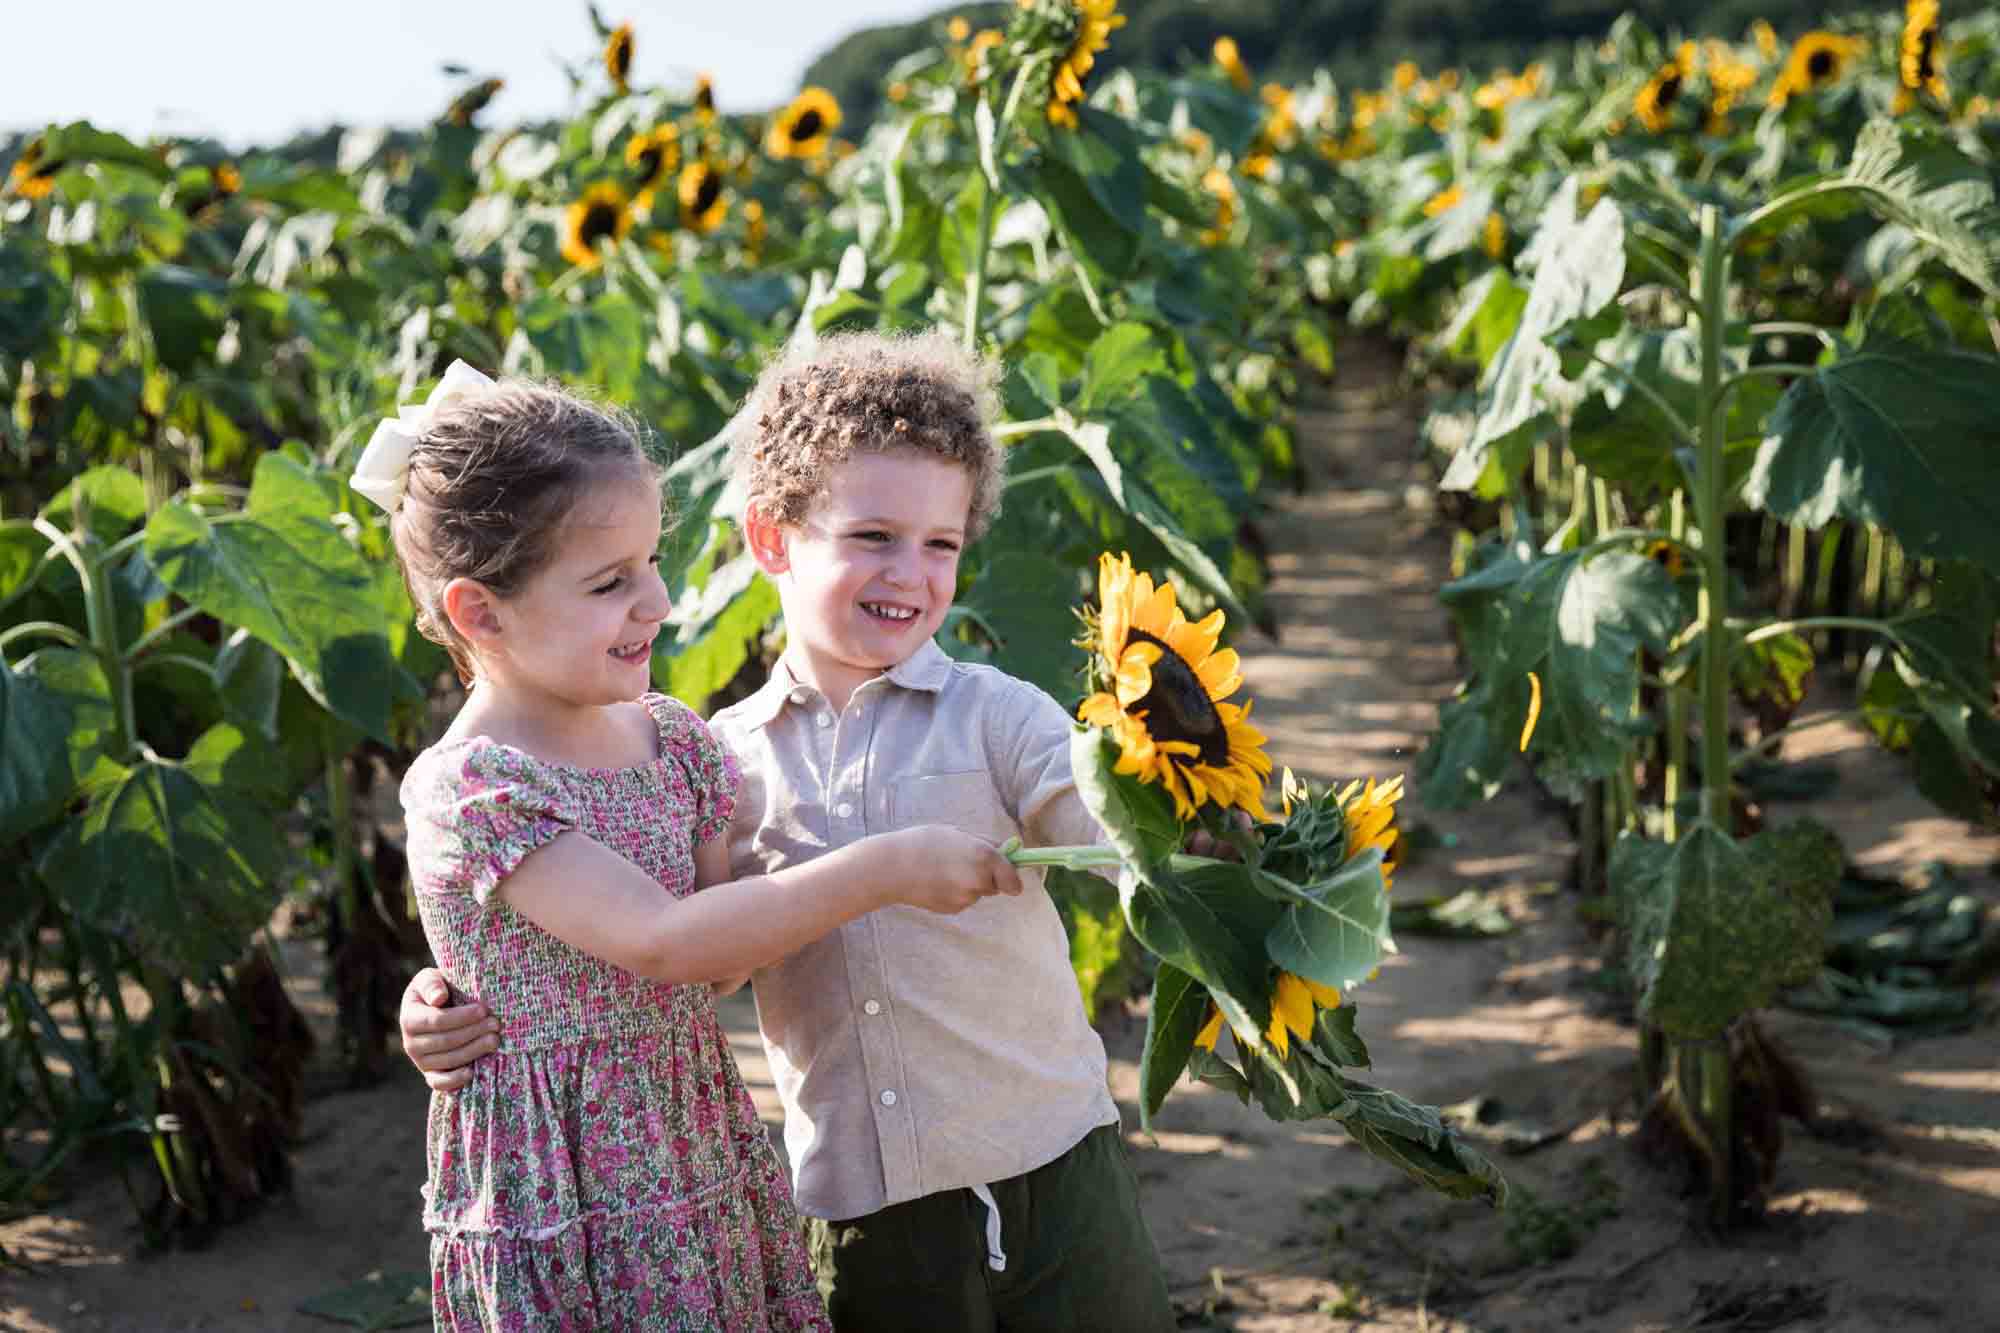 Little boy and girl playing with a big sunflower stalk